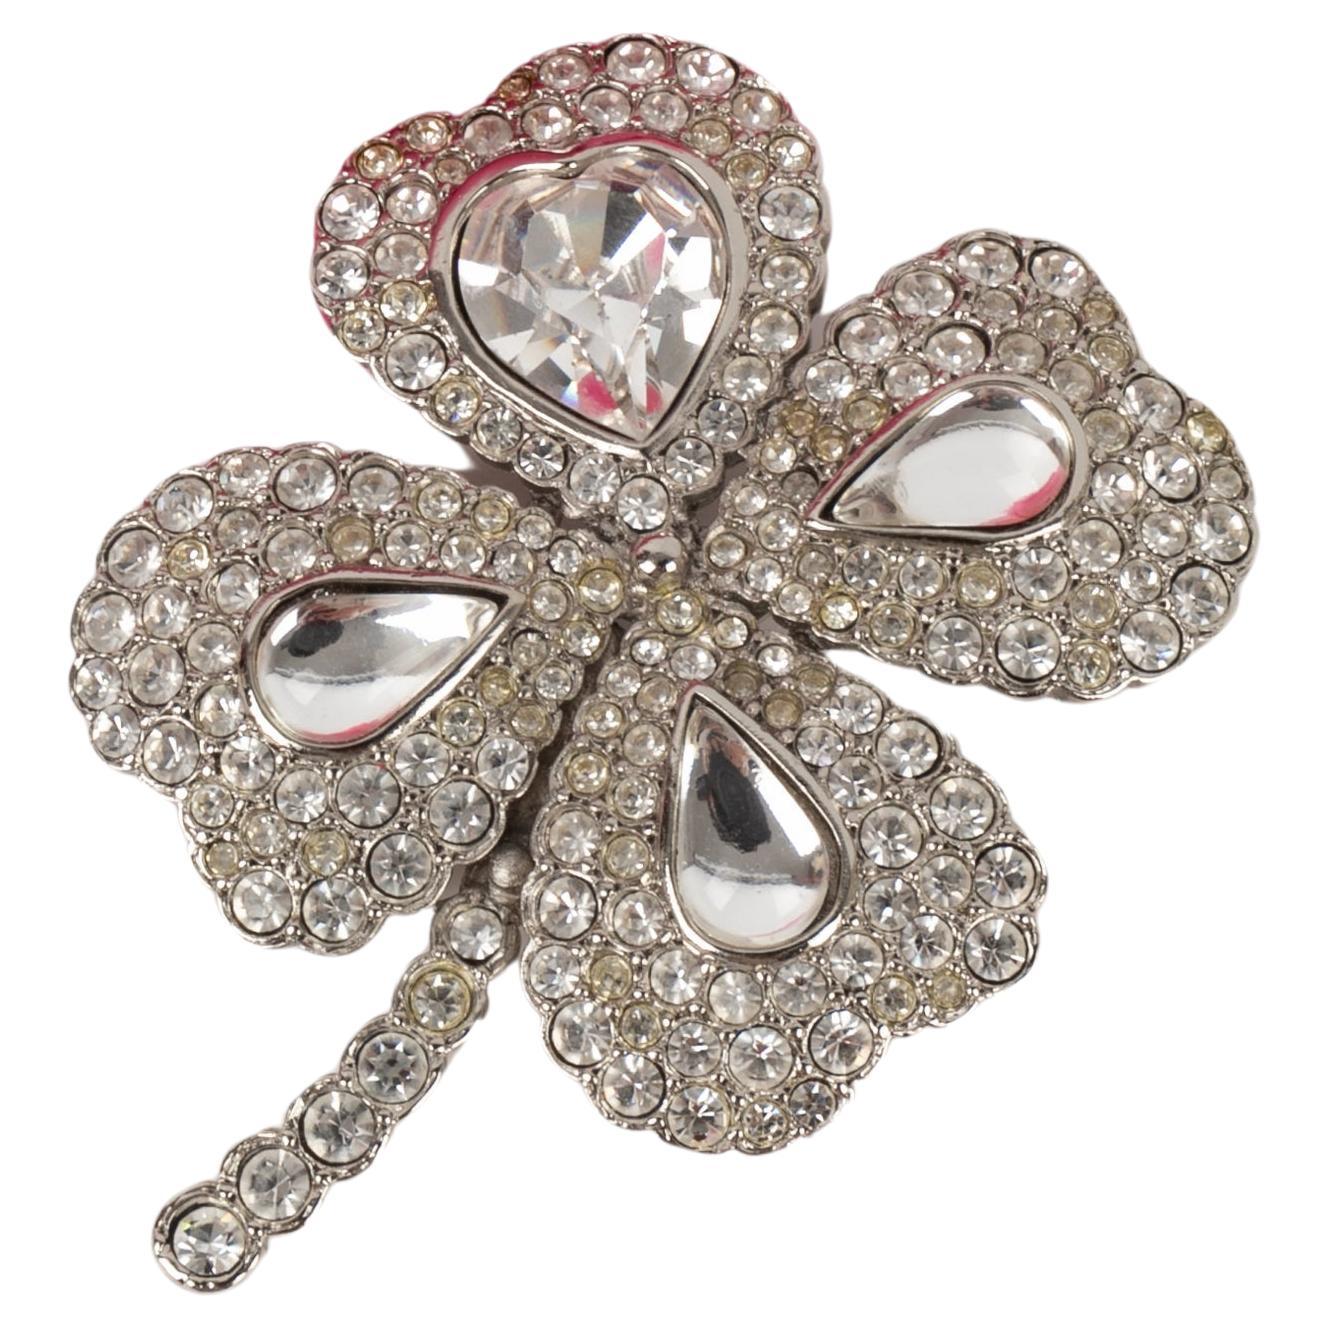 Yves Saint Laurent Silvery Metal Pendant Brooch Ornamented with Rhinestones For Sale